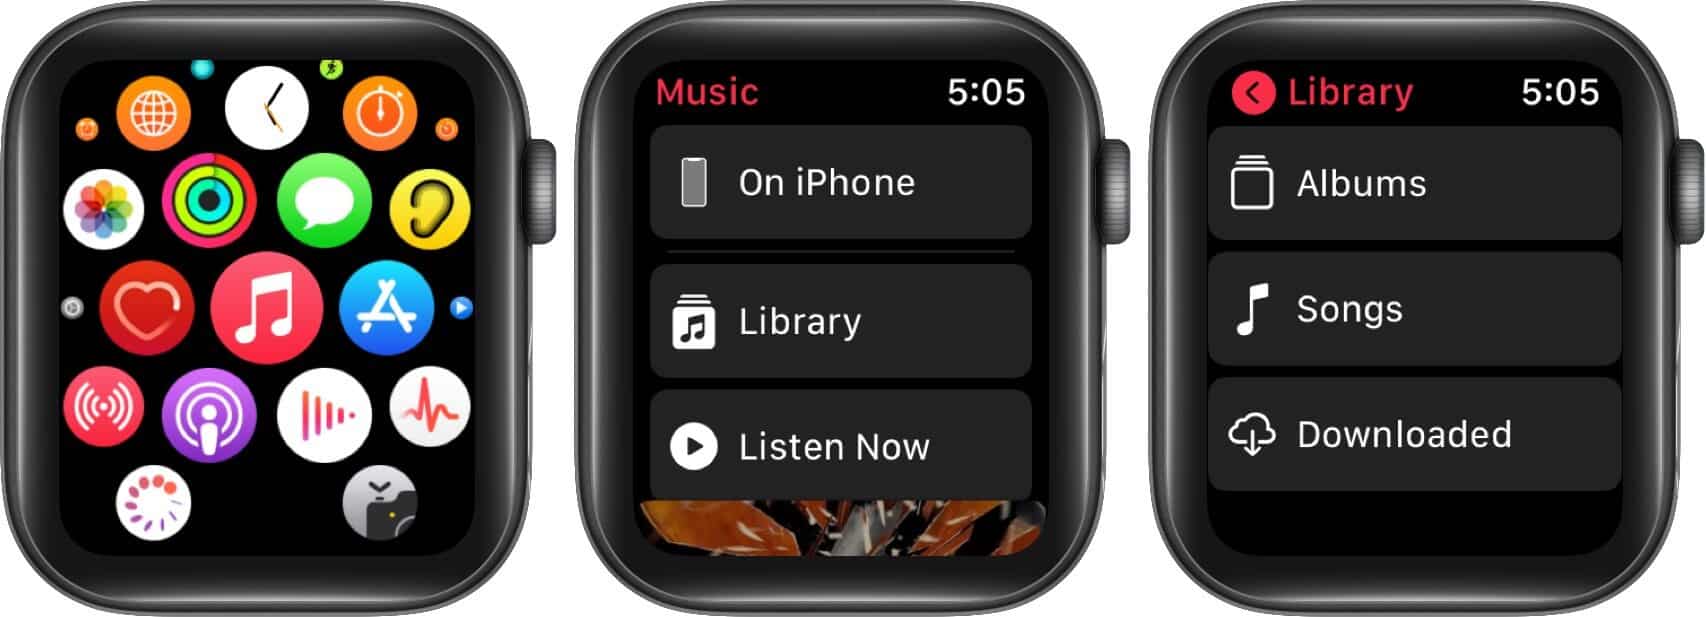 tap on music app in my watch tap then swipe left on item and tap on delete in watch app on iphone